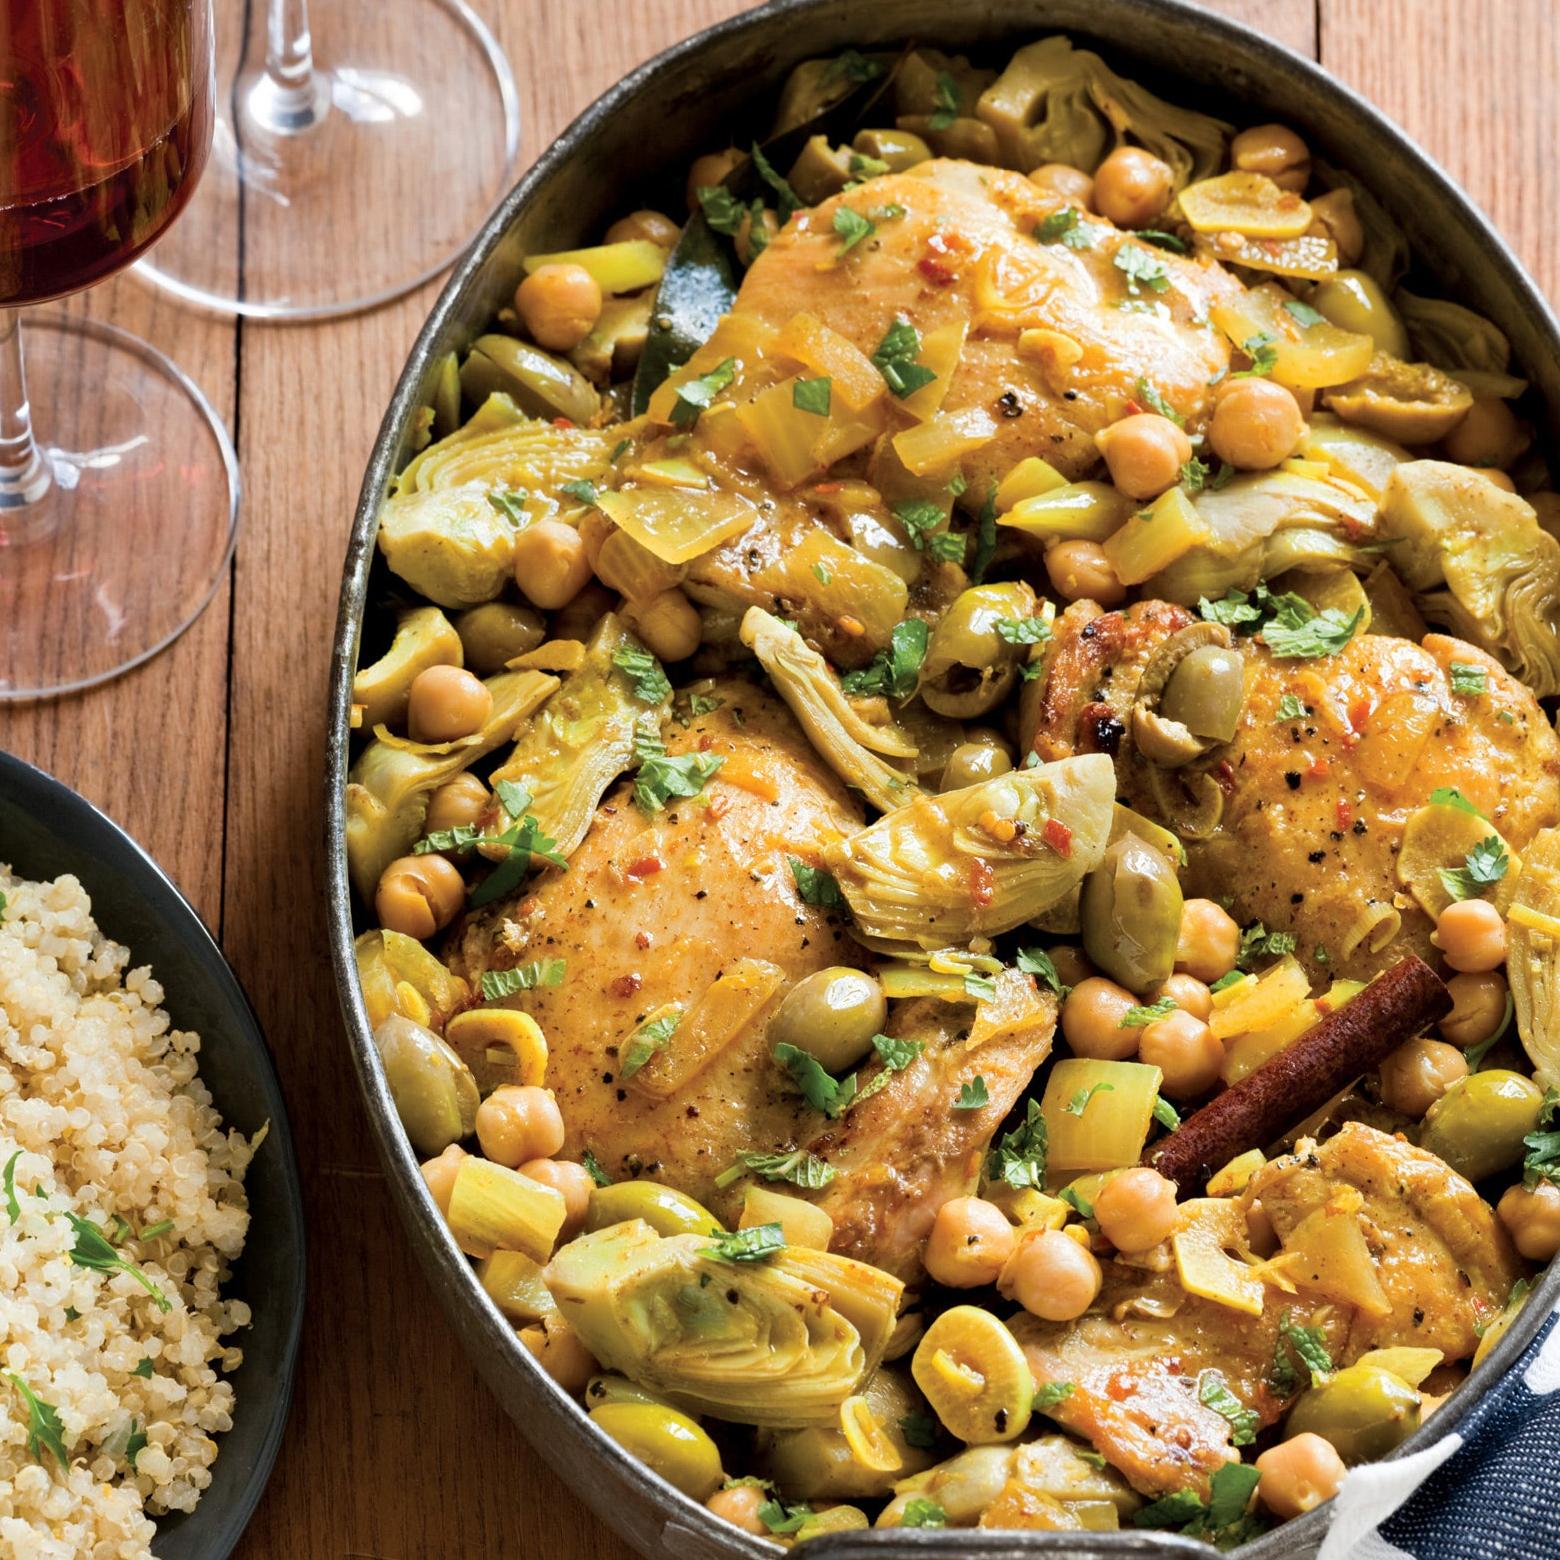  Aromatic wine and savory chicken – what a delight!